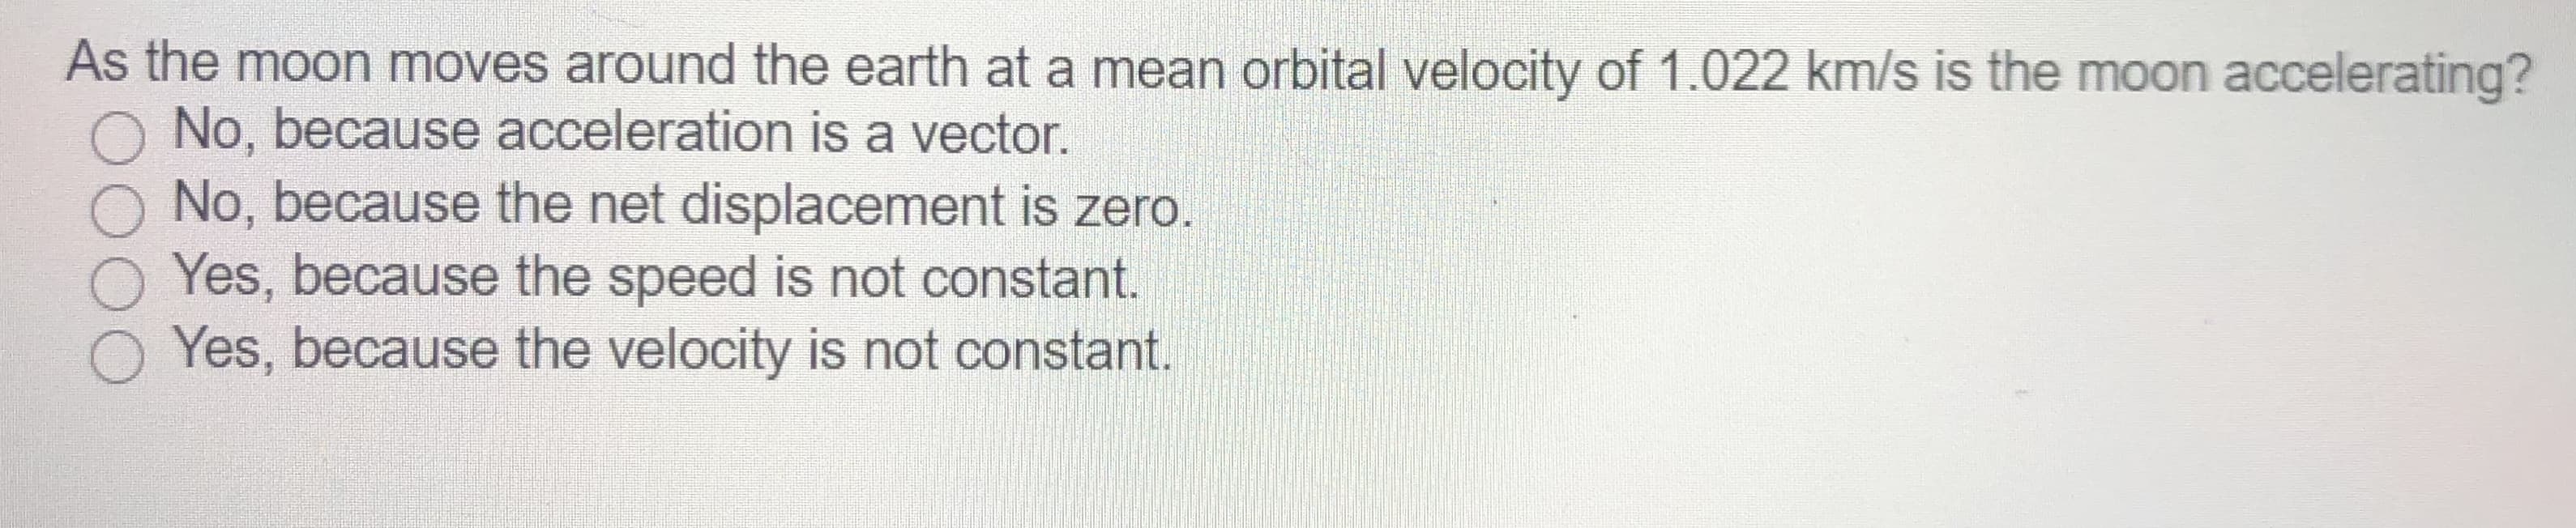 As the moon moves around the earth at a mean orbital velocity of 1.022 km/s is the moon accelerating?
O No, because acceleration is a vector.
No, because the net displacement is zero.
O Yes, because the speed is not constant.
Yes, because the velocity is not constant.
